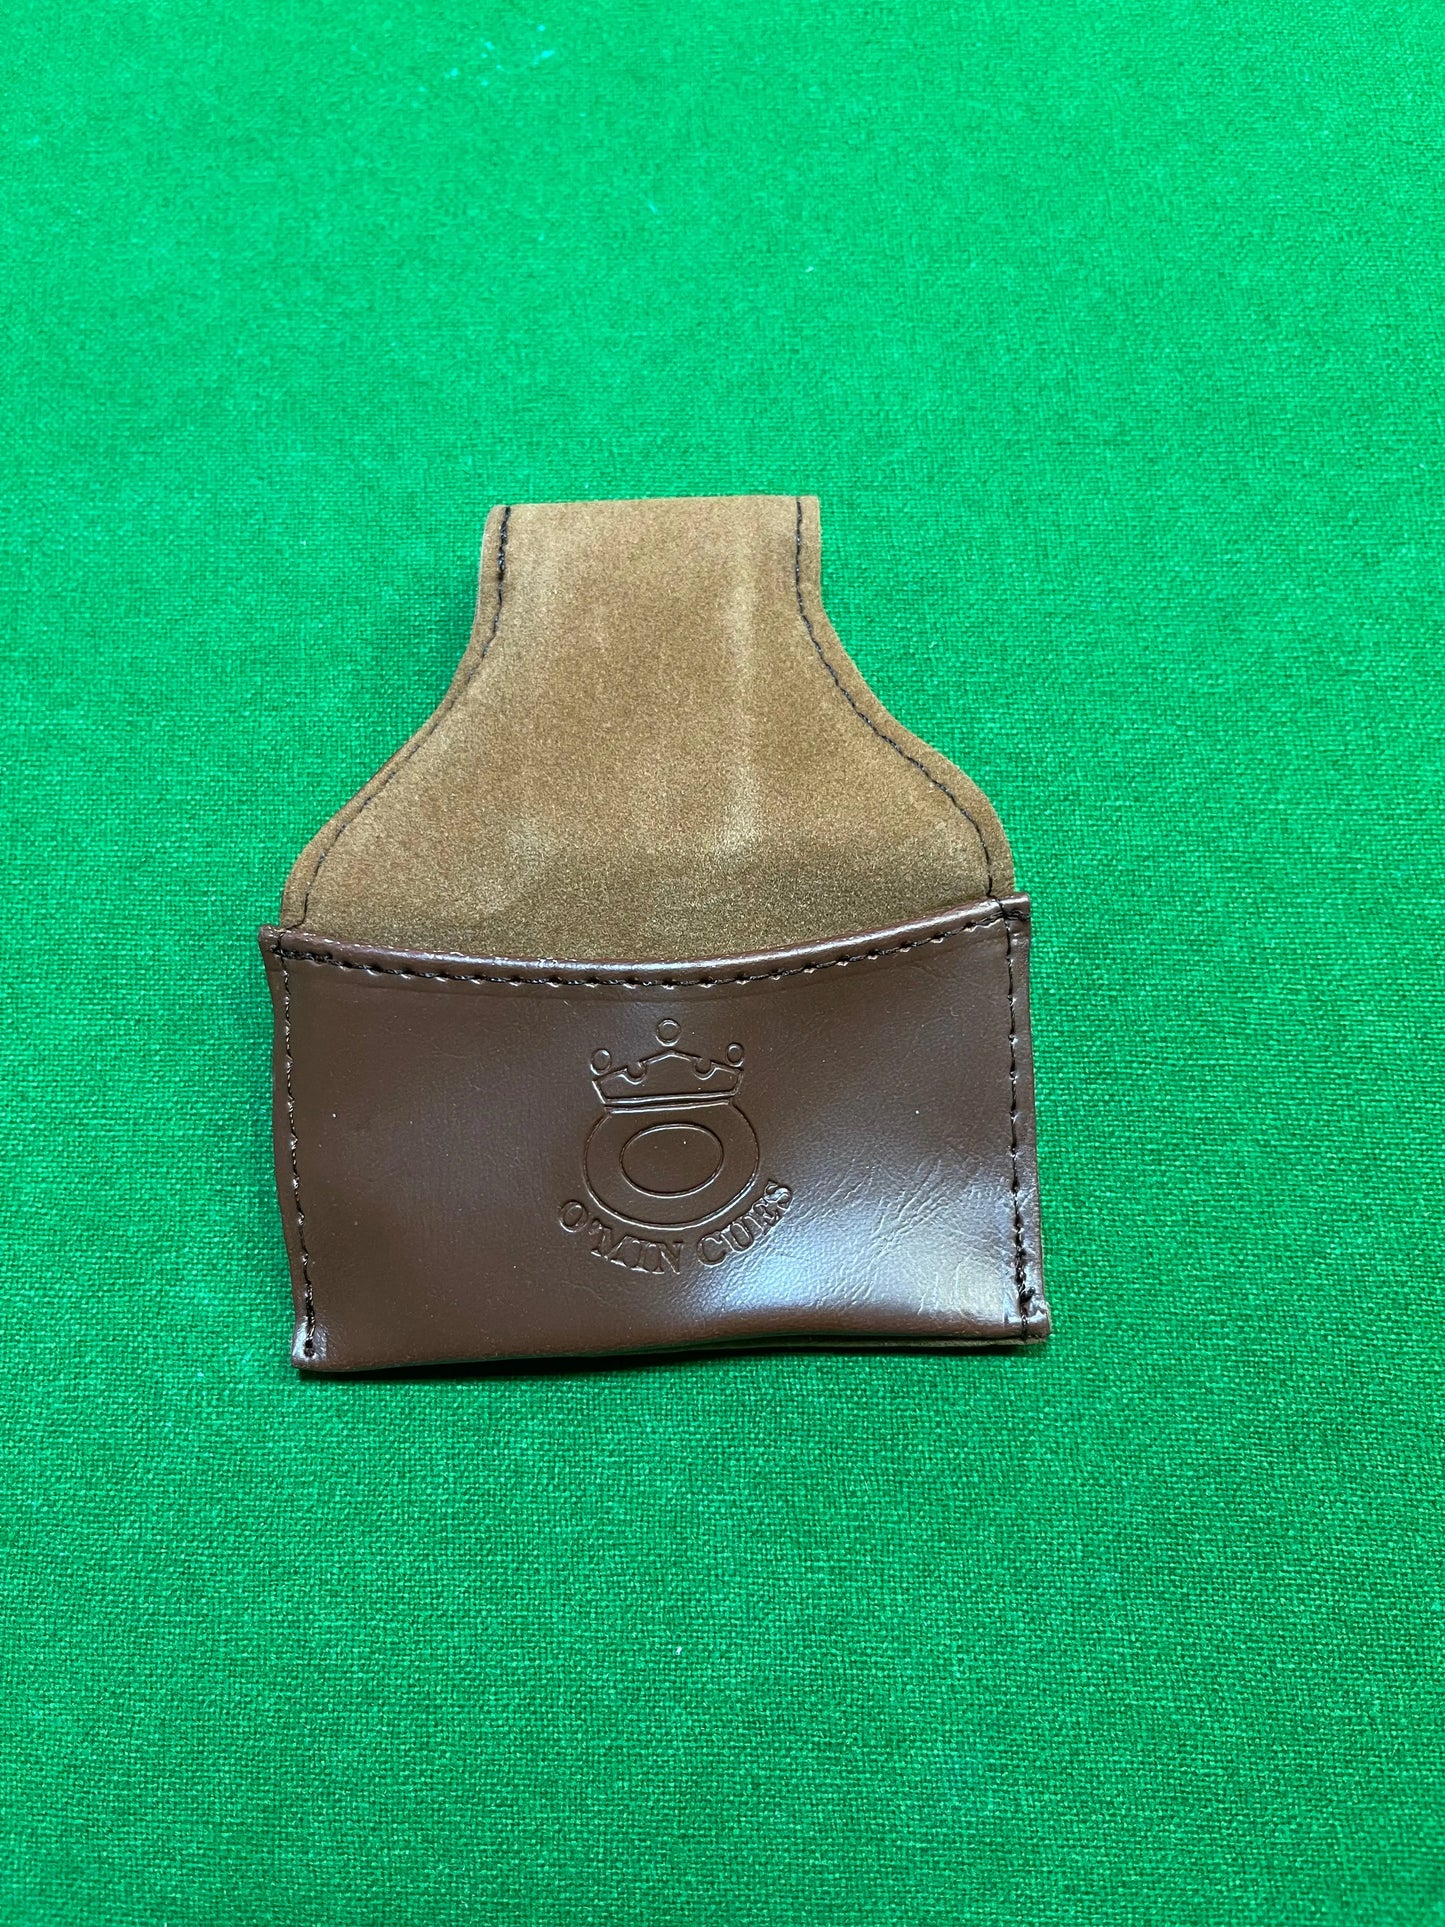 Pool Snooker Billiard Chalk Holder Leather Pouch - Q-Masters